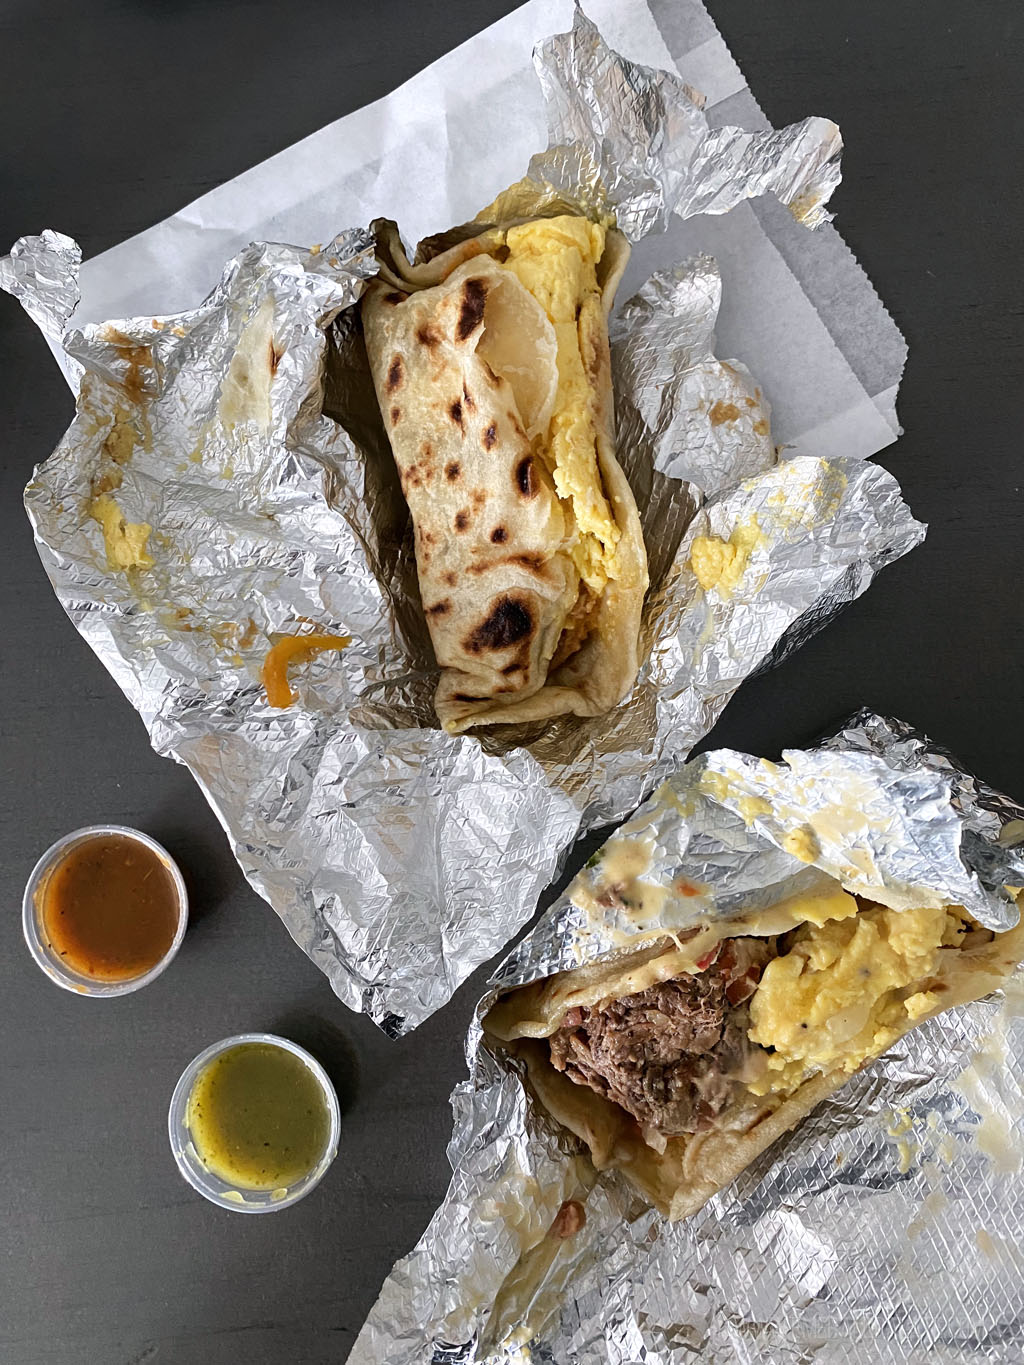 tin foil splayed out to show messy tacos inside